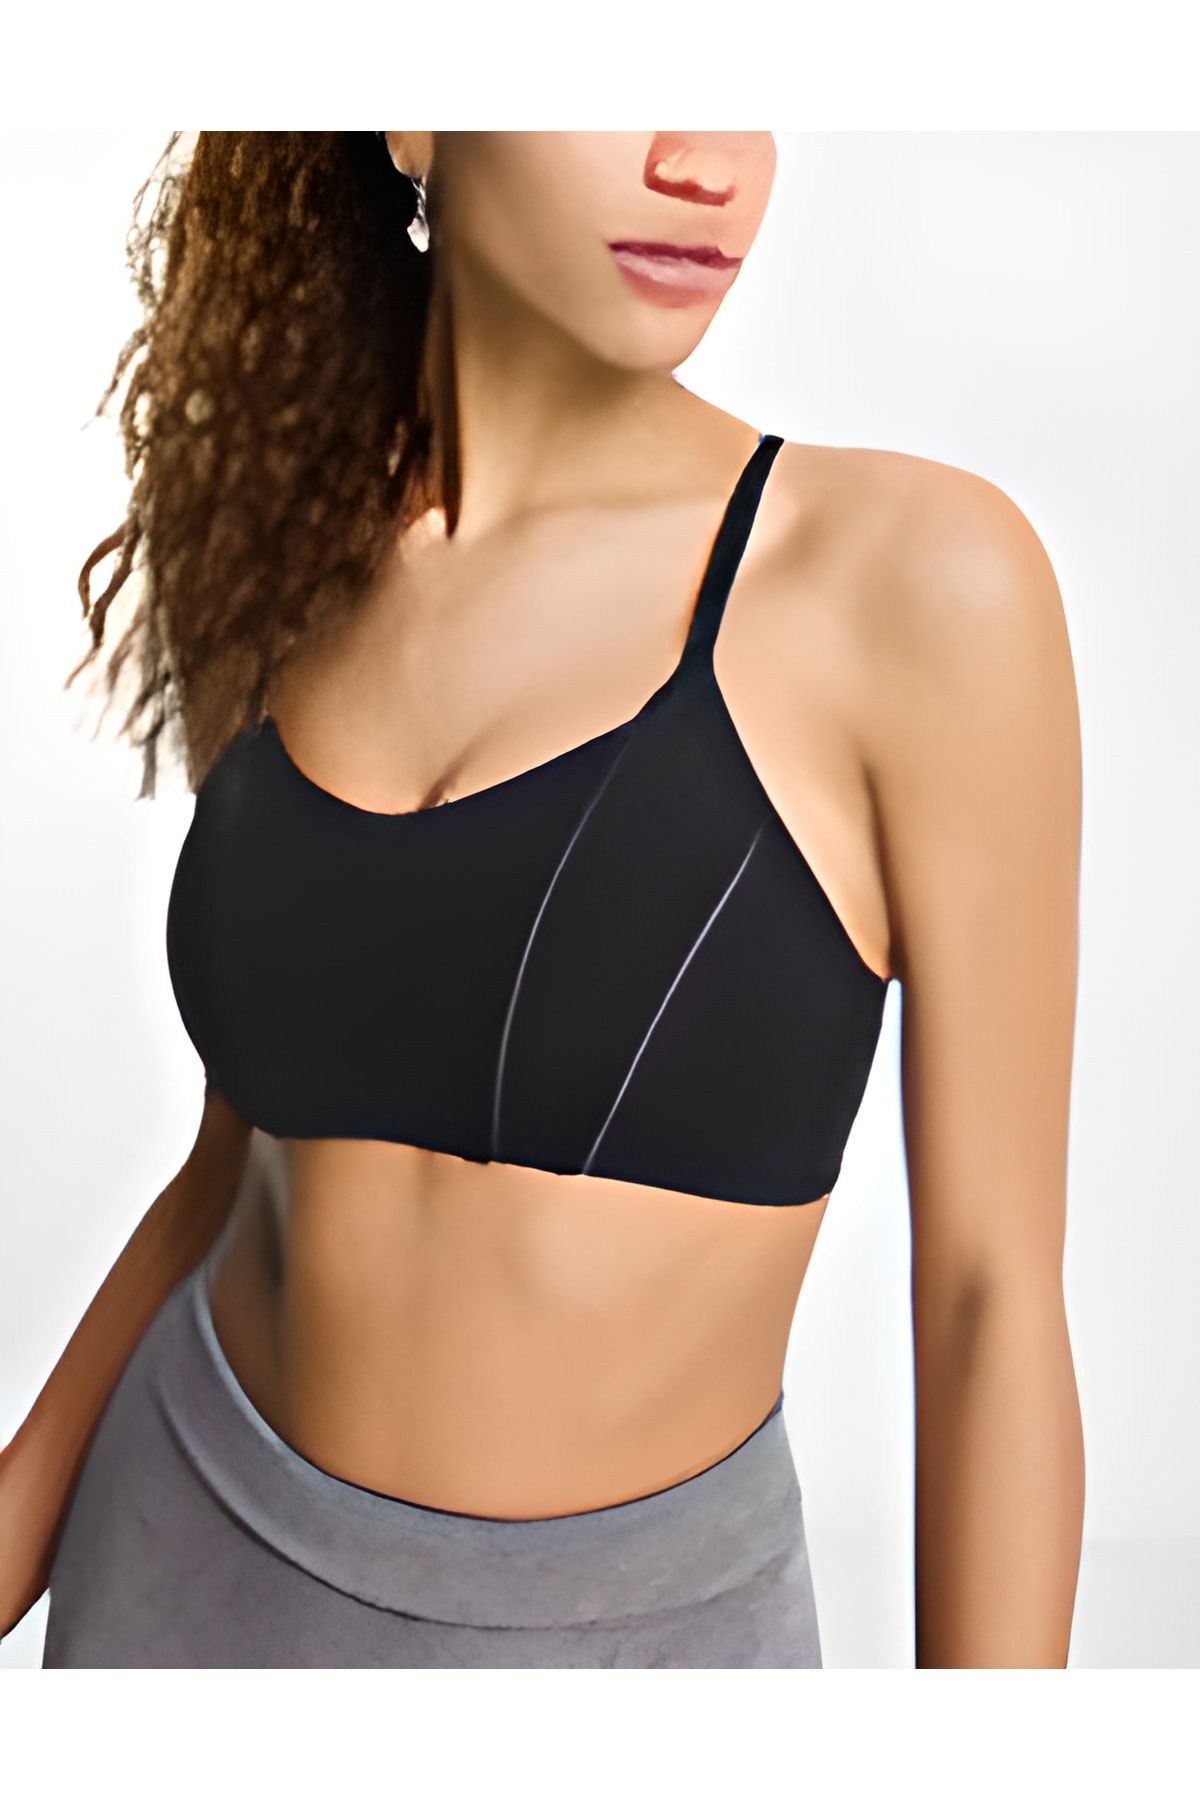 Nike Yoga Dri-fit Indy Lightly Supported Padded Women's Sports Bra